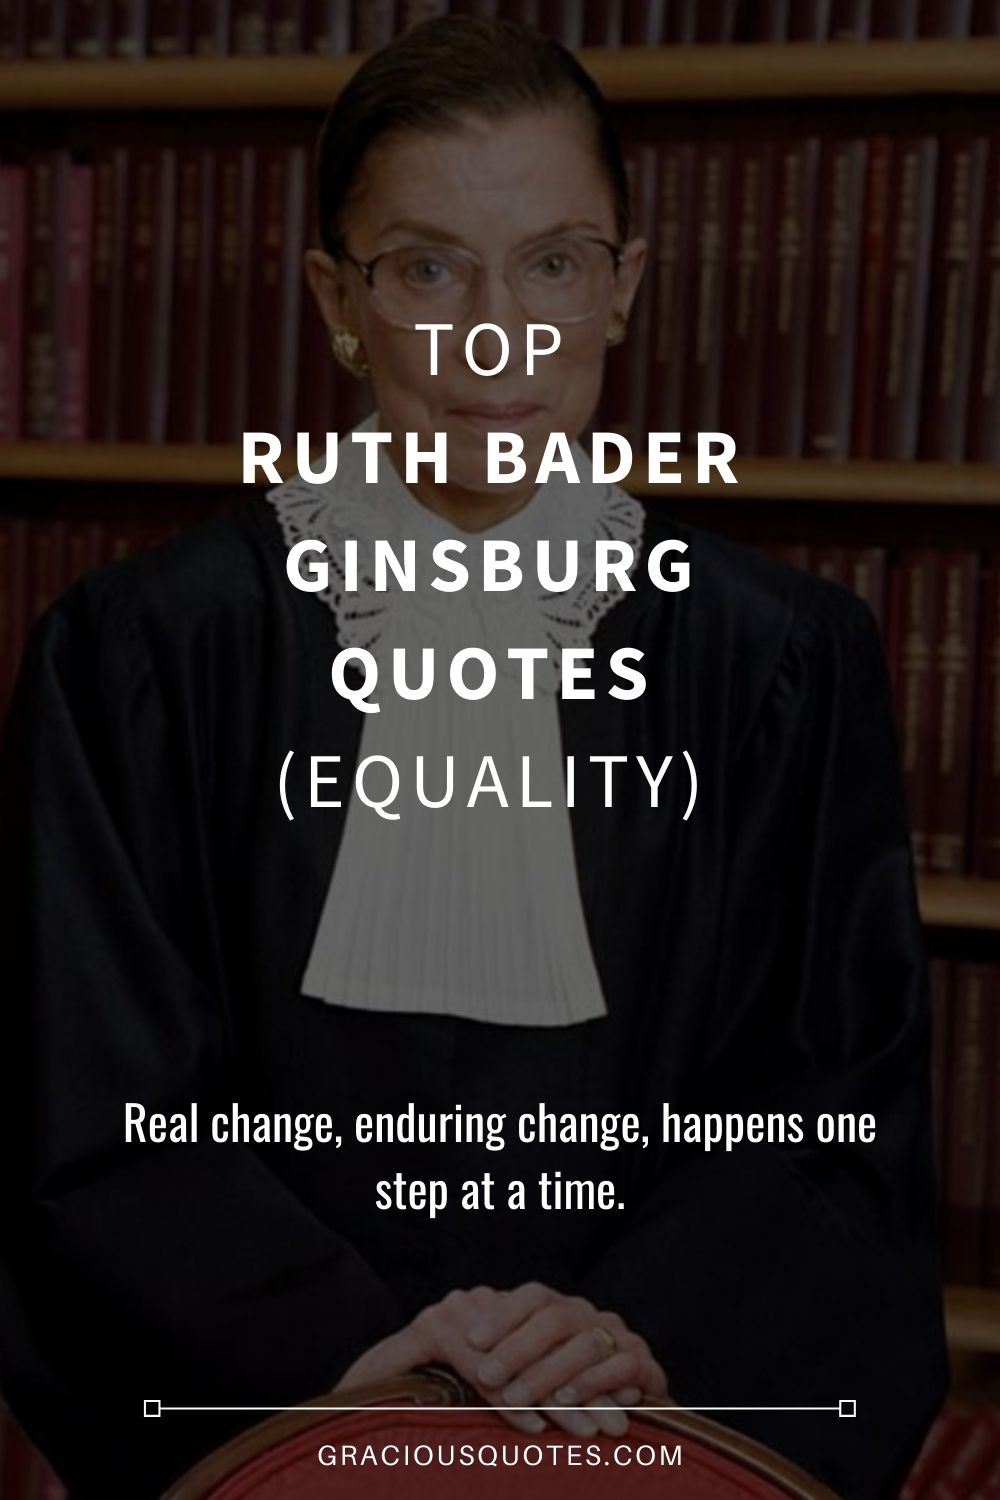 Top Ruth Bader Ginsburg Quotes (EQUALITY) - Gracious Quotes